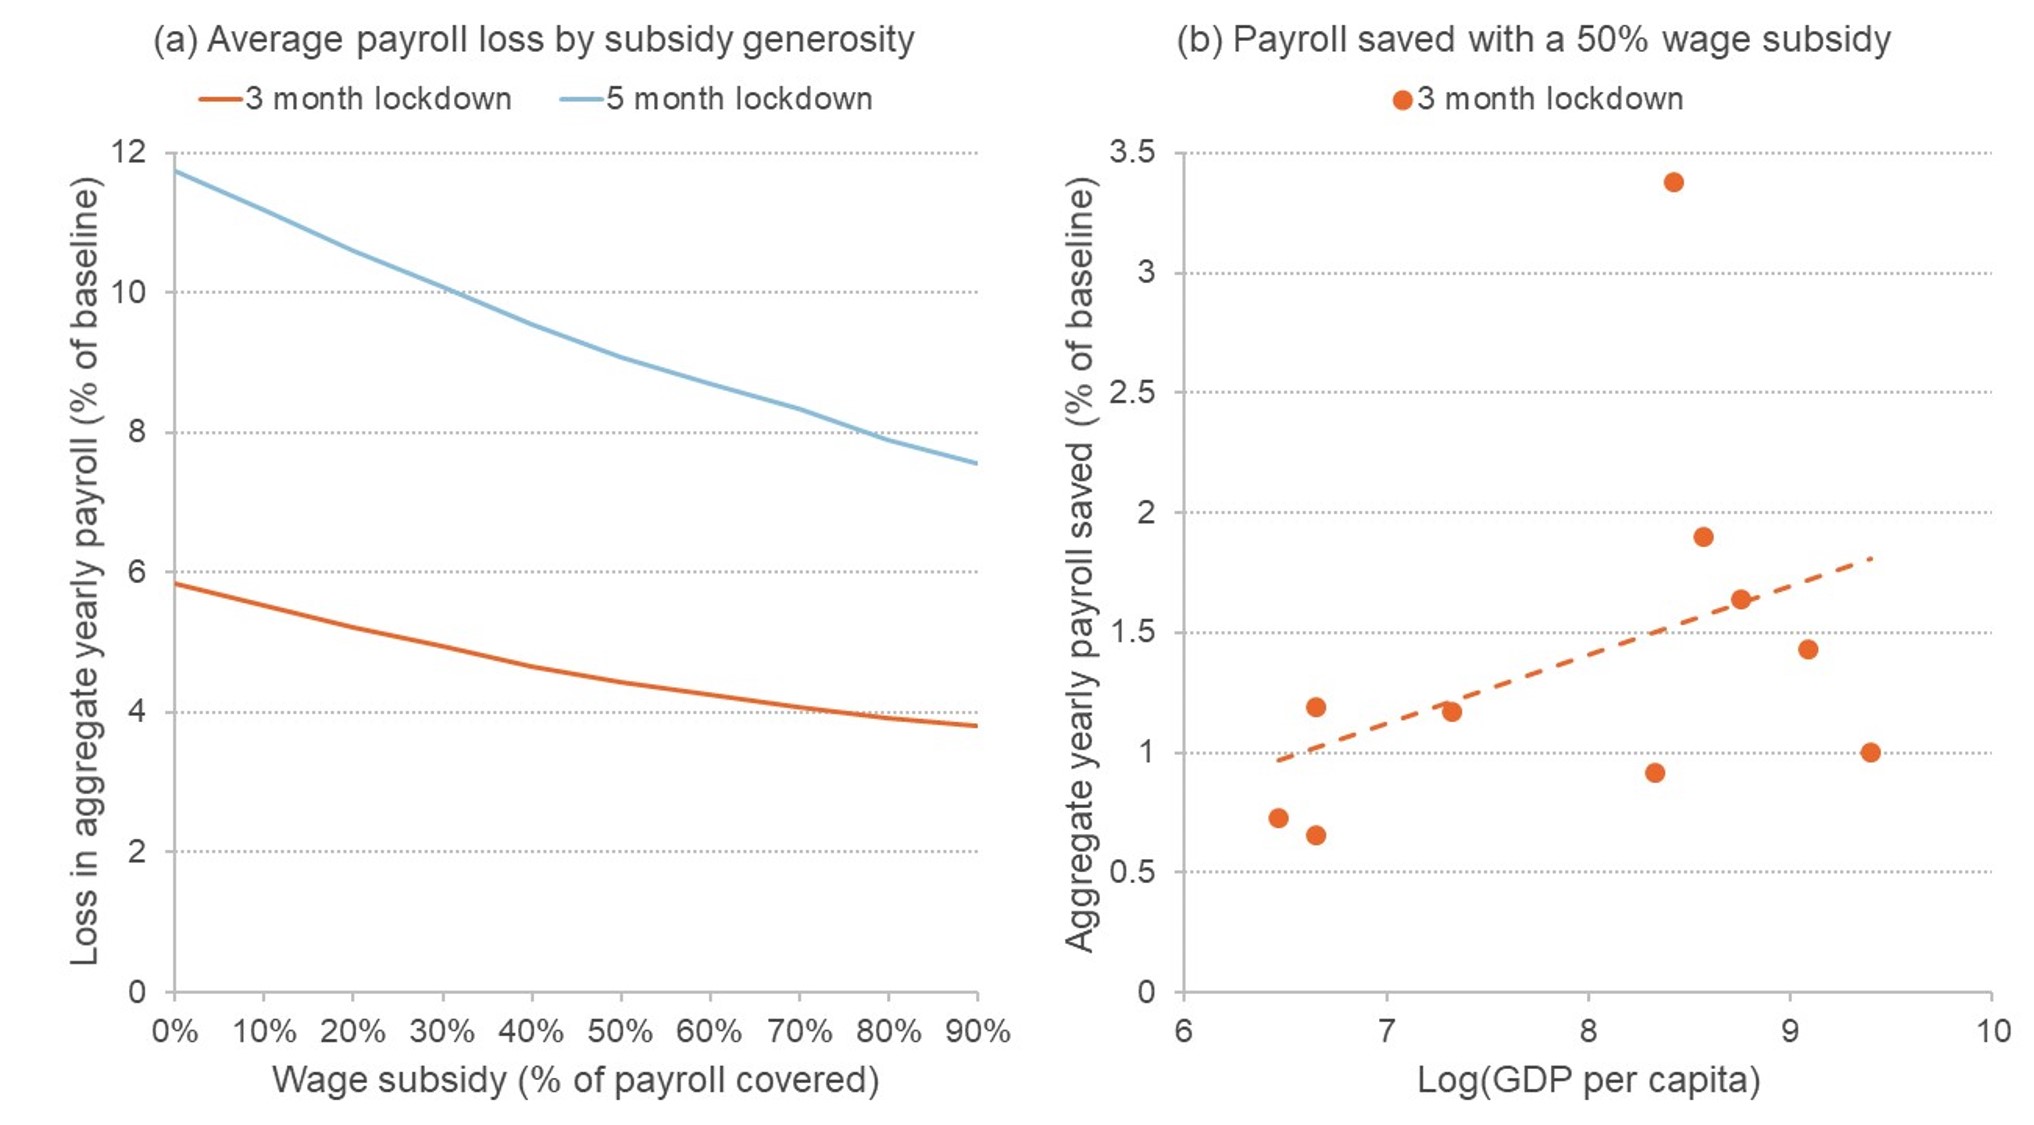 Graphs showing impact of wage subsidies on payroll loss